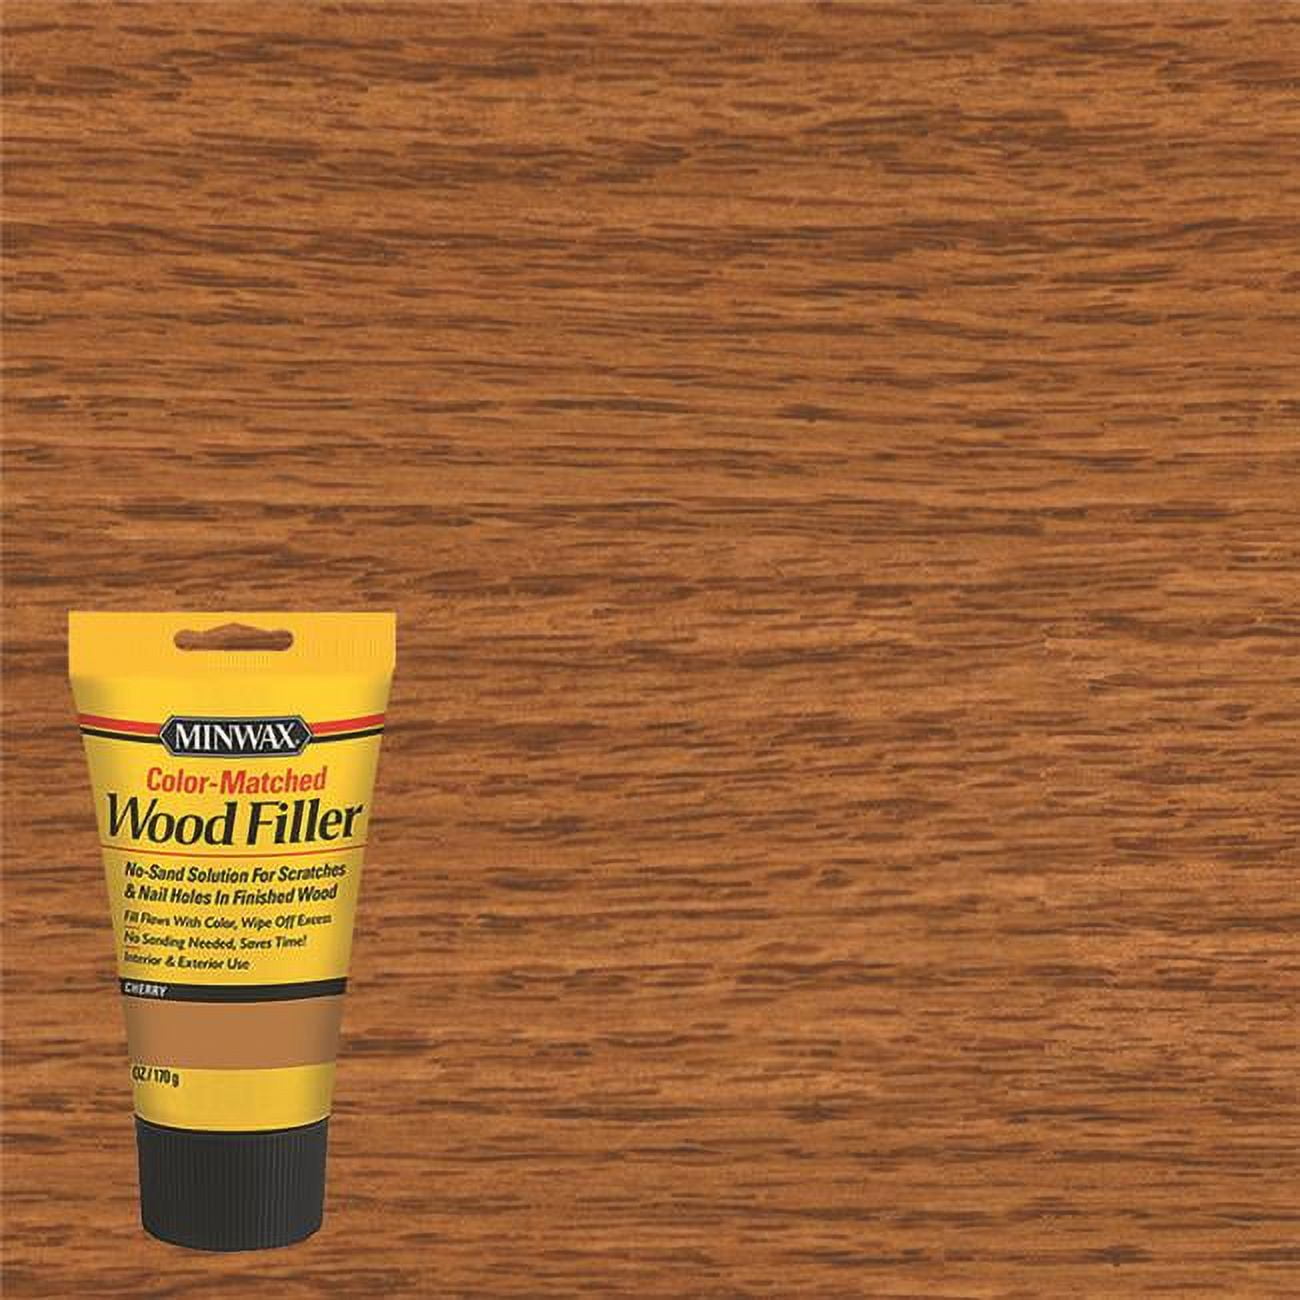 When and How To Use Wood Filler